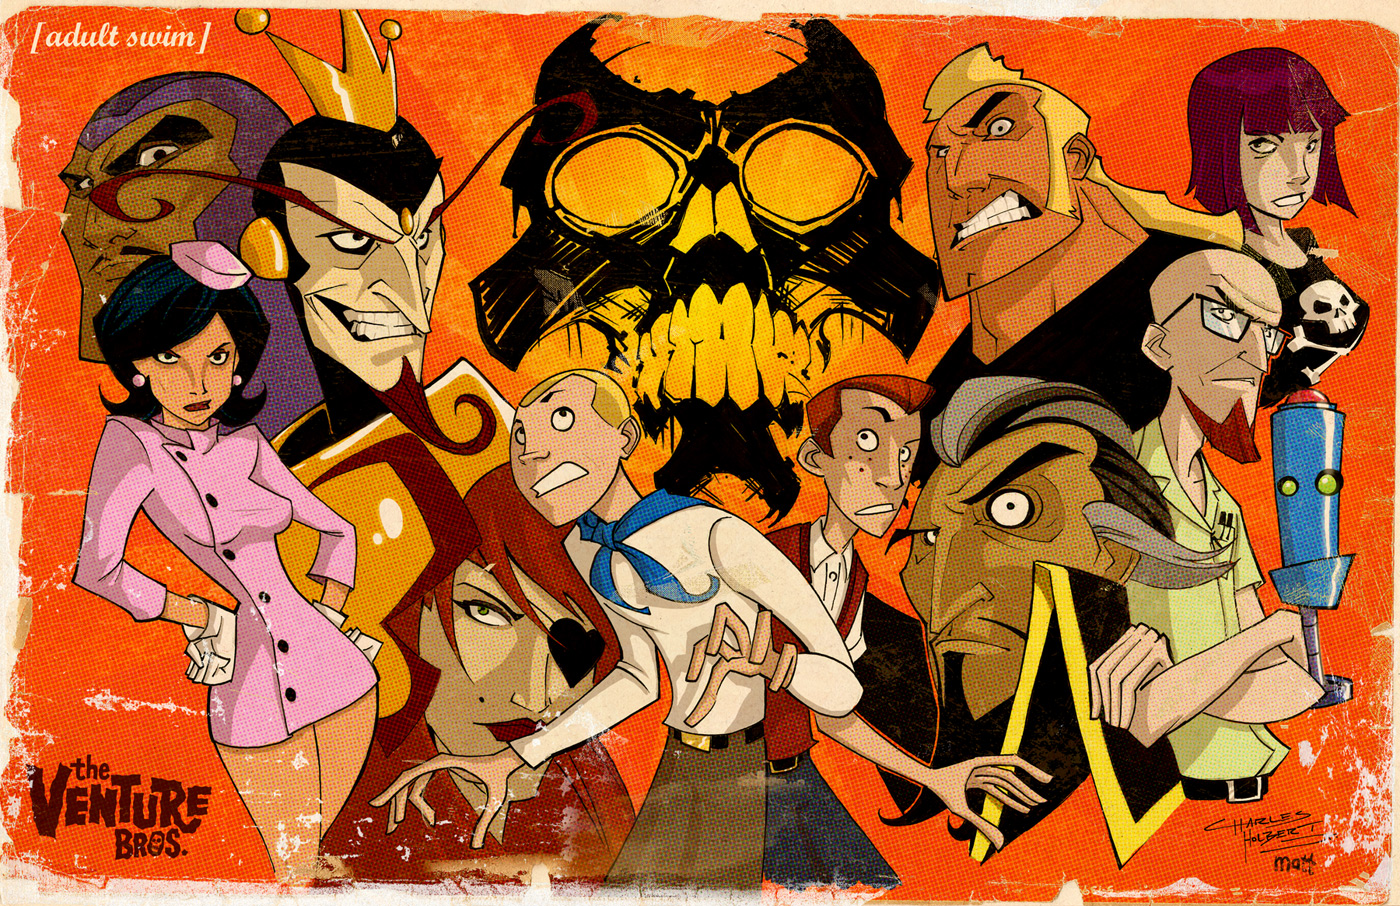 “The Venture Bros.” is Most Excellent